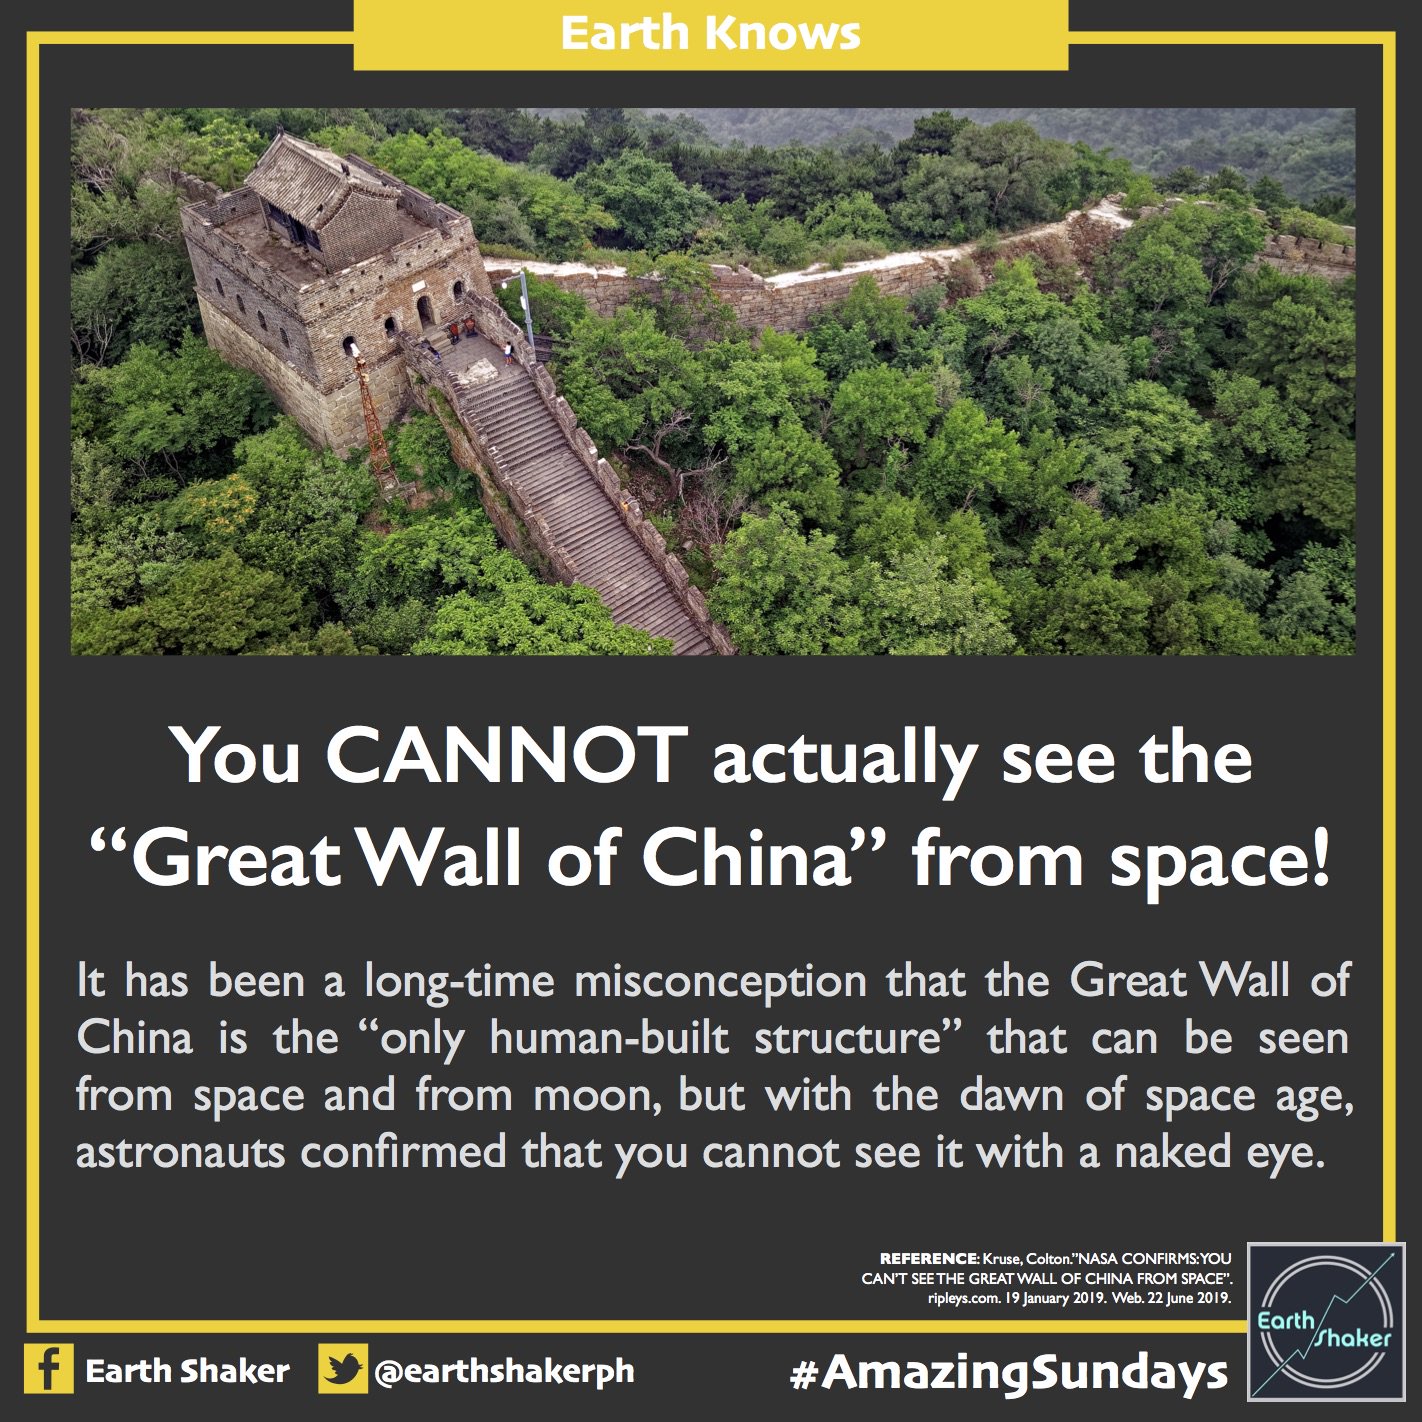 Can You See the Great Wall of China from Space? 